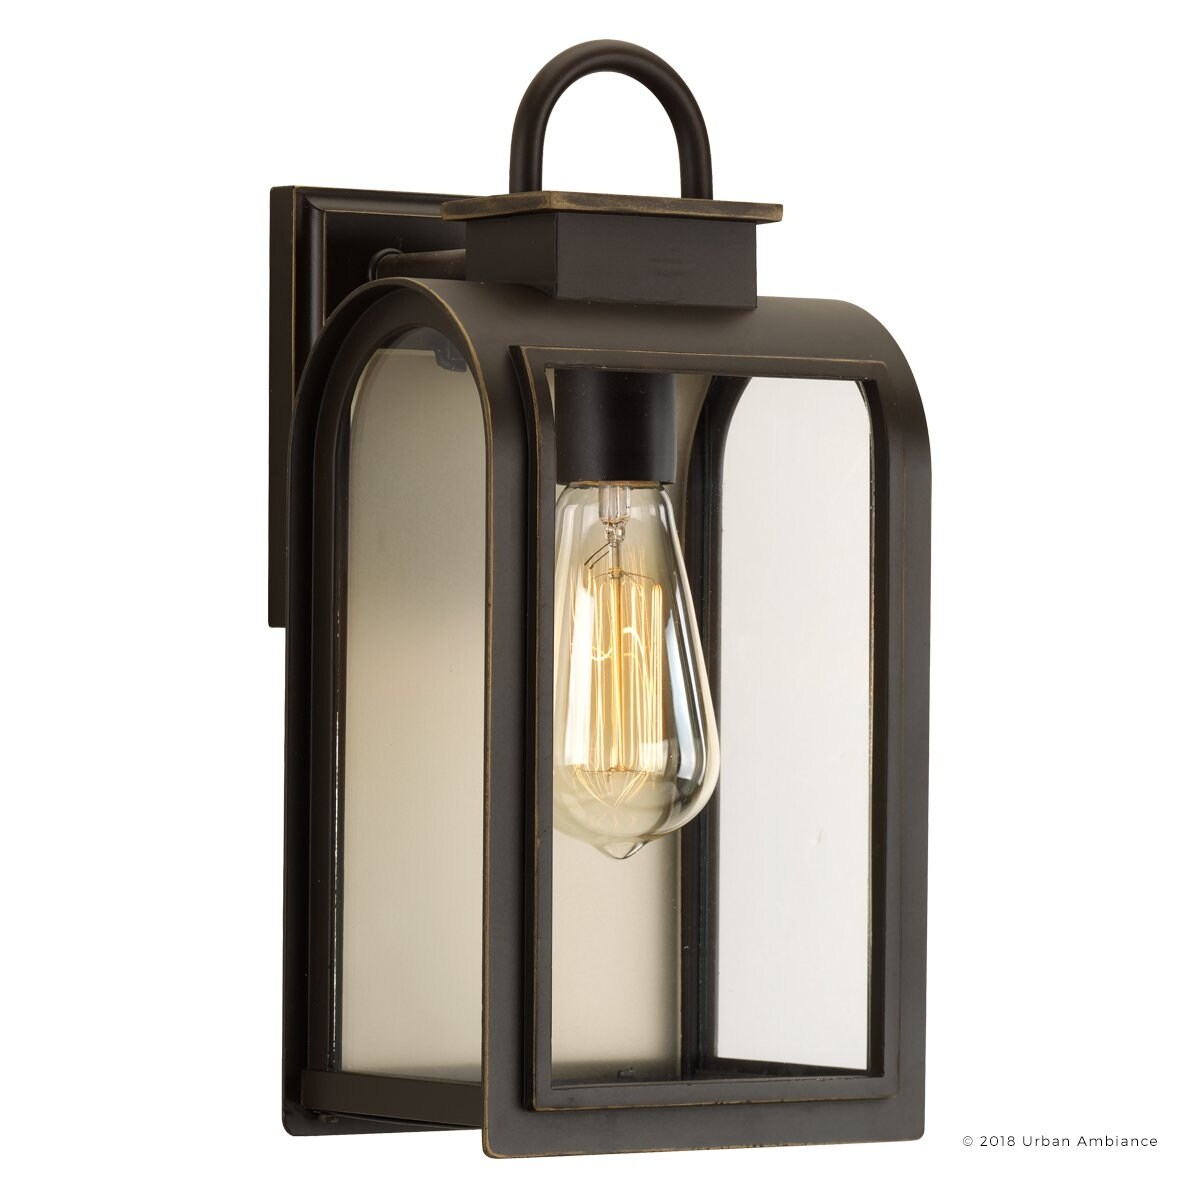 Luxury Rustic Outdoor Wall Light, 8.625H x 6.5W, with Craftsman